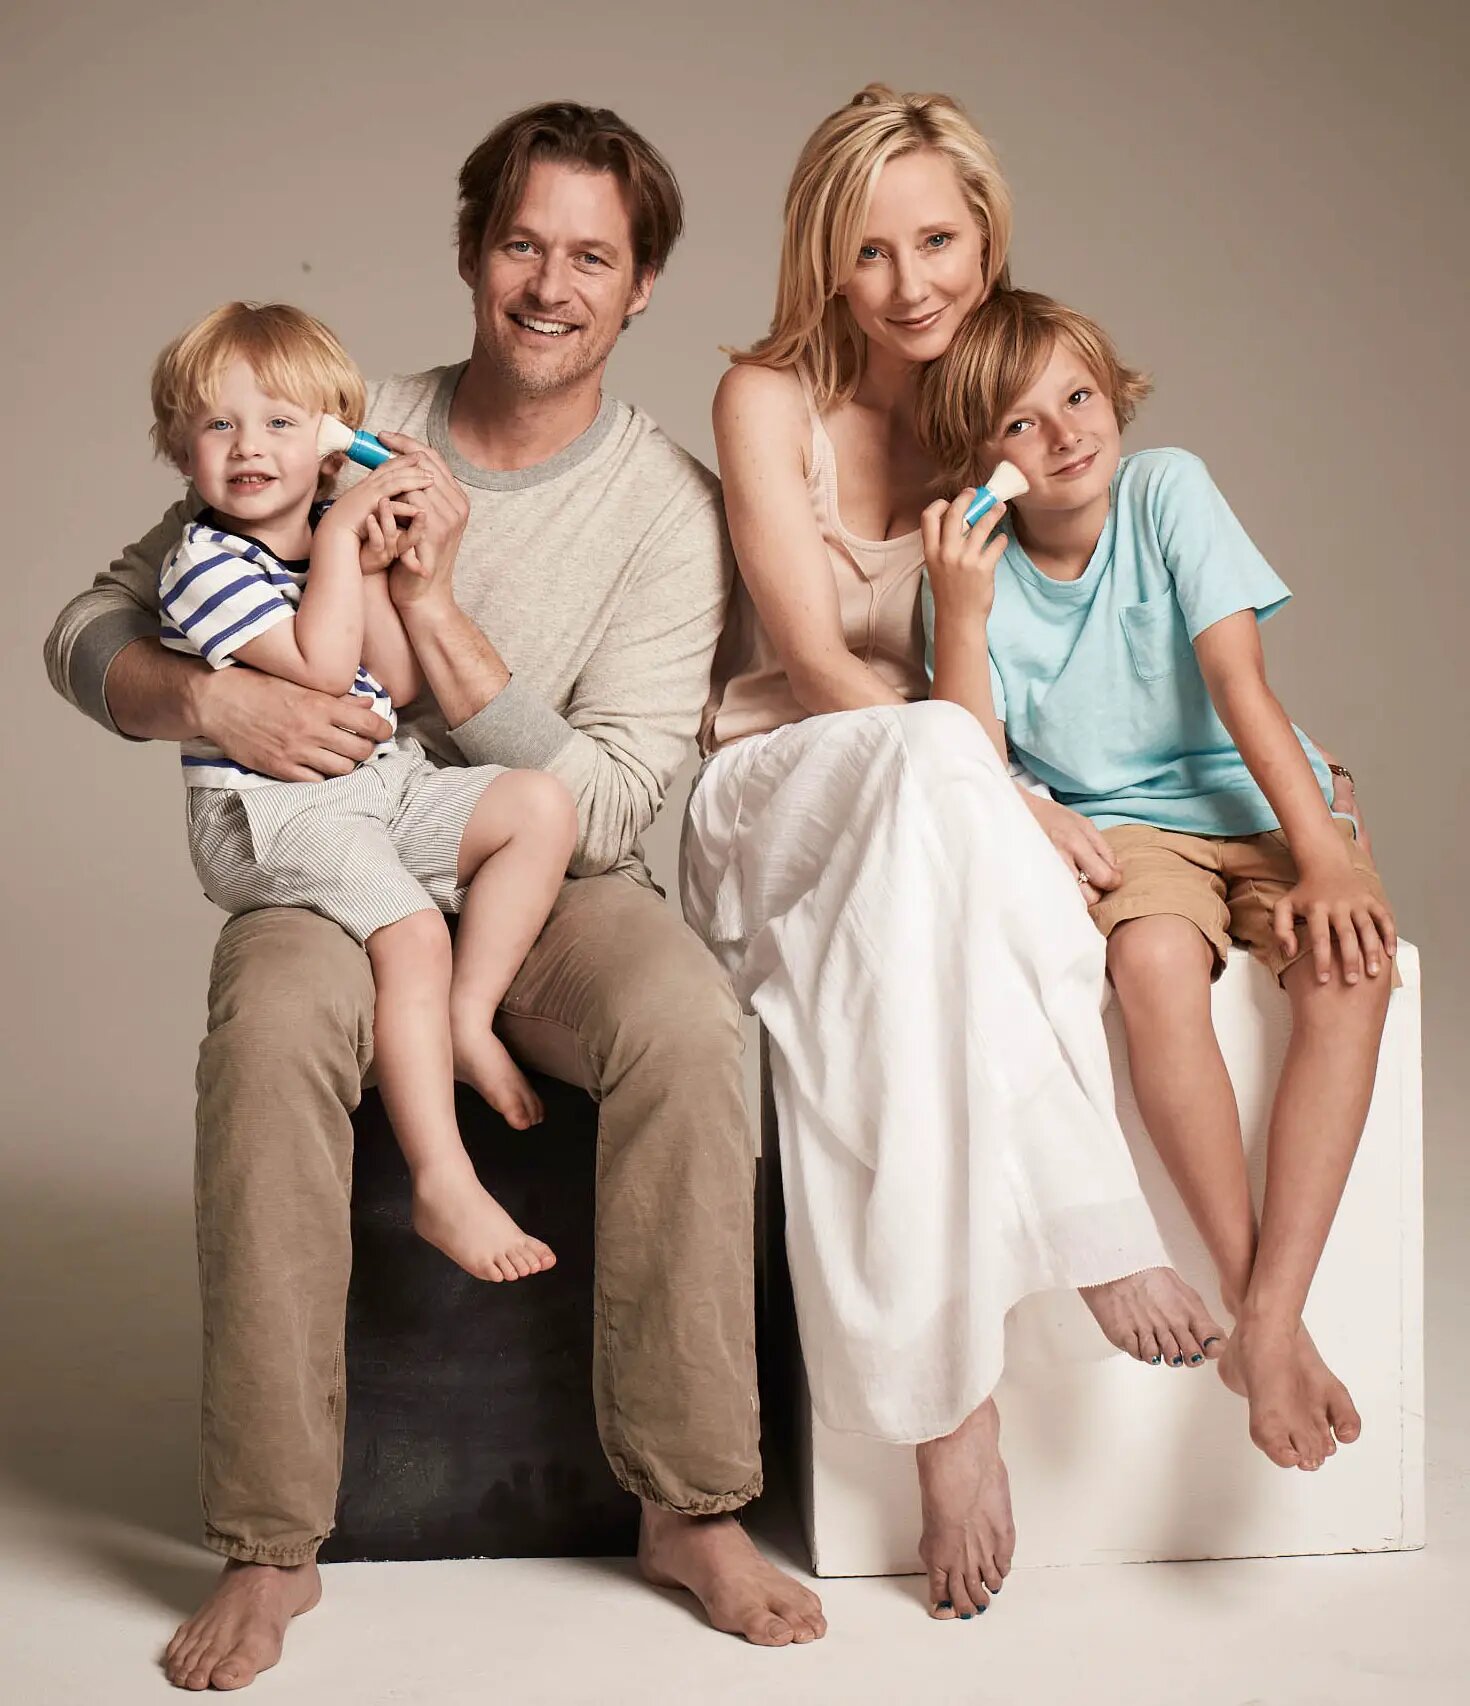 james-tupper-with-anne-heche-and-children